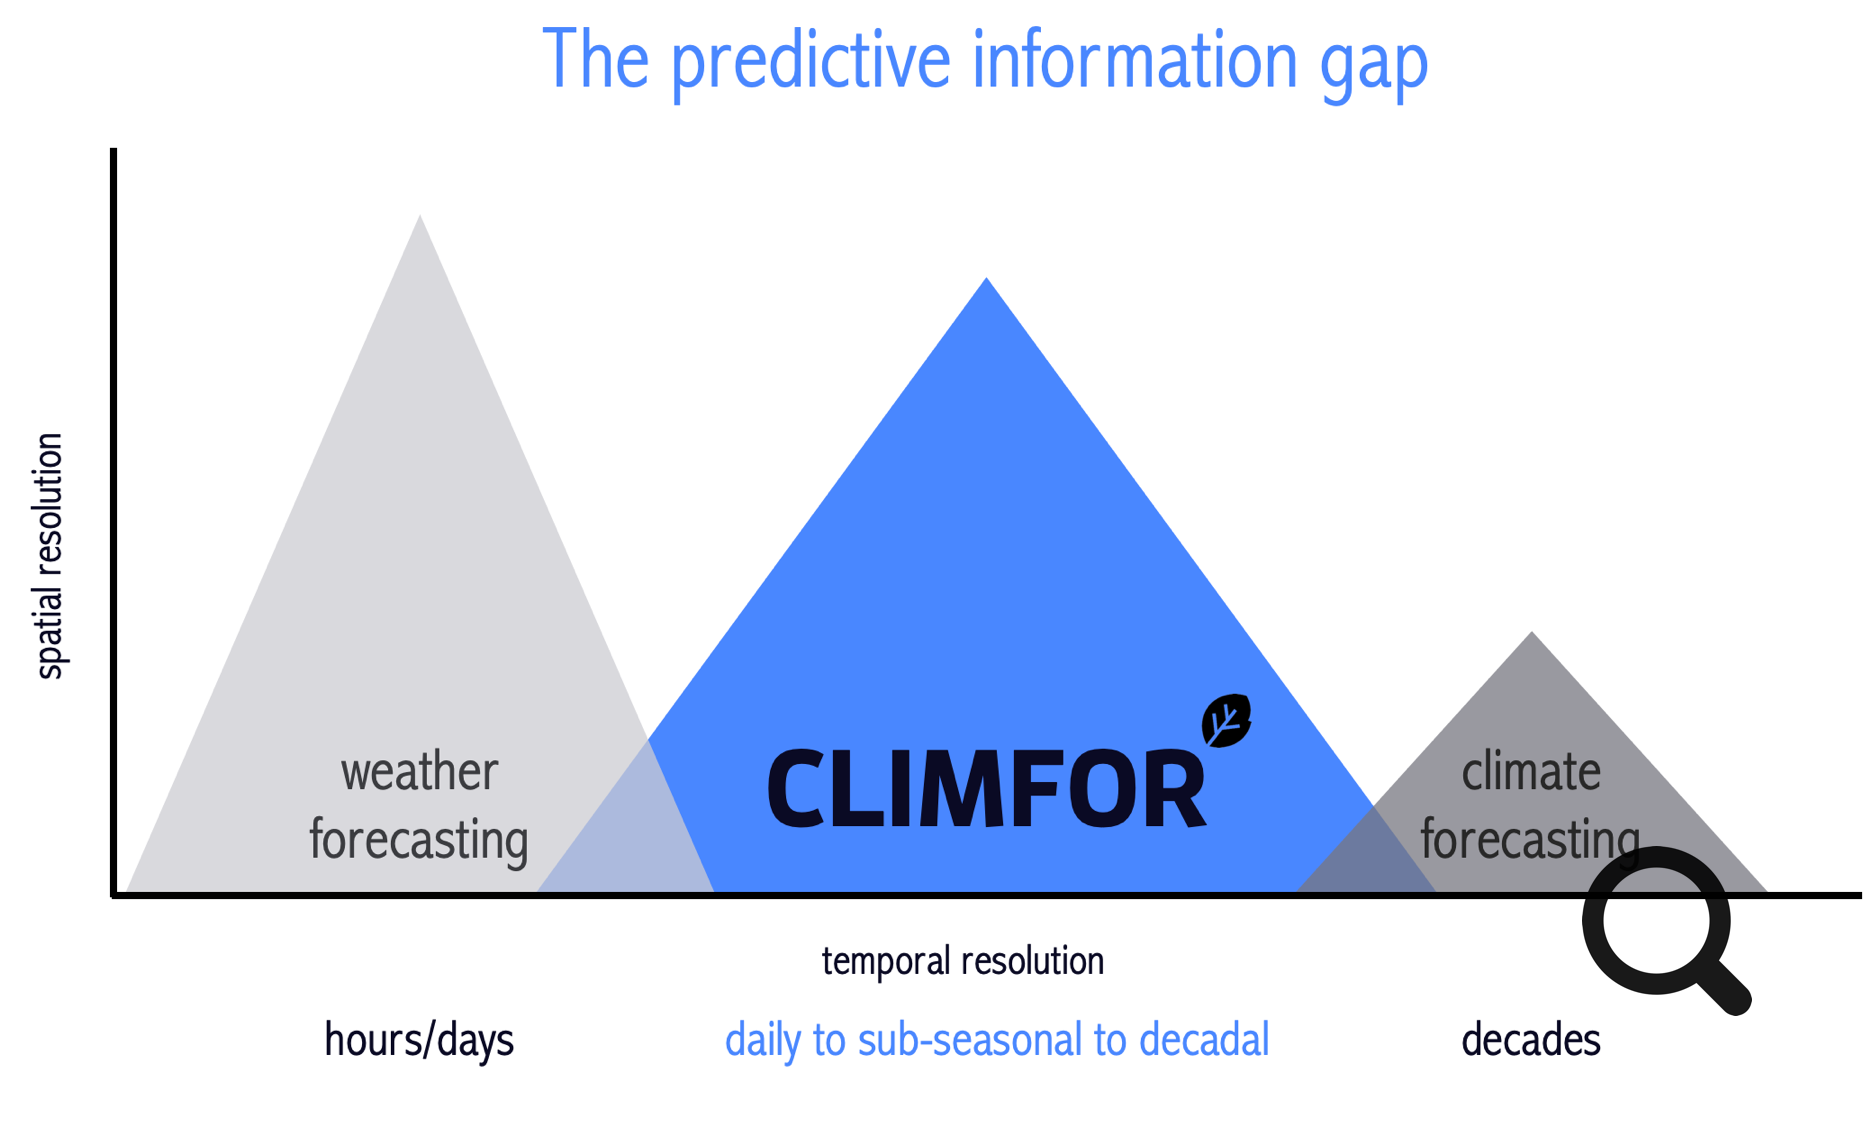 predictive information gap between weather and climate forecasting